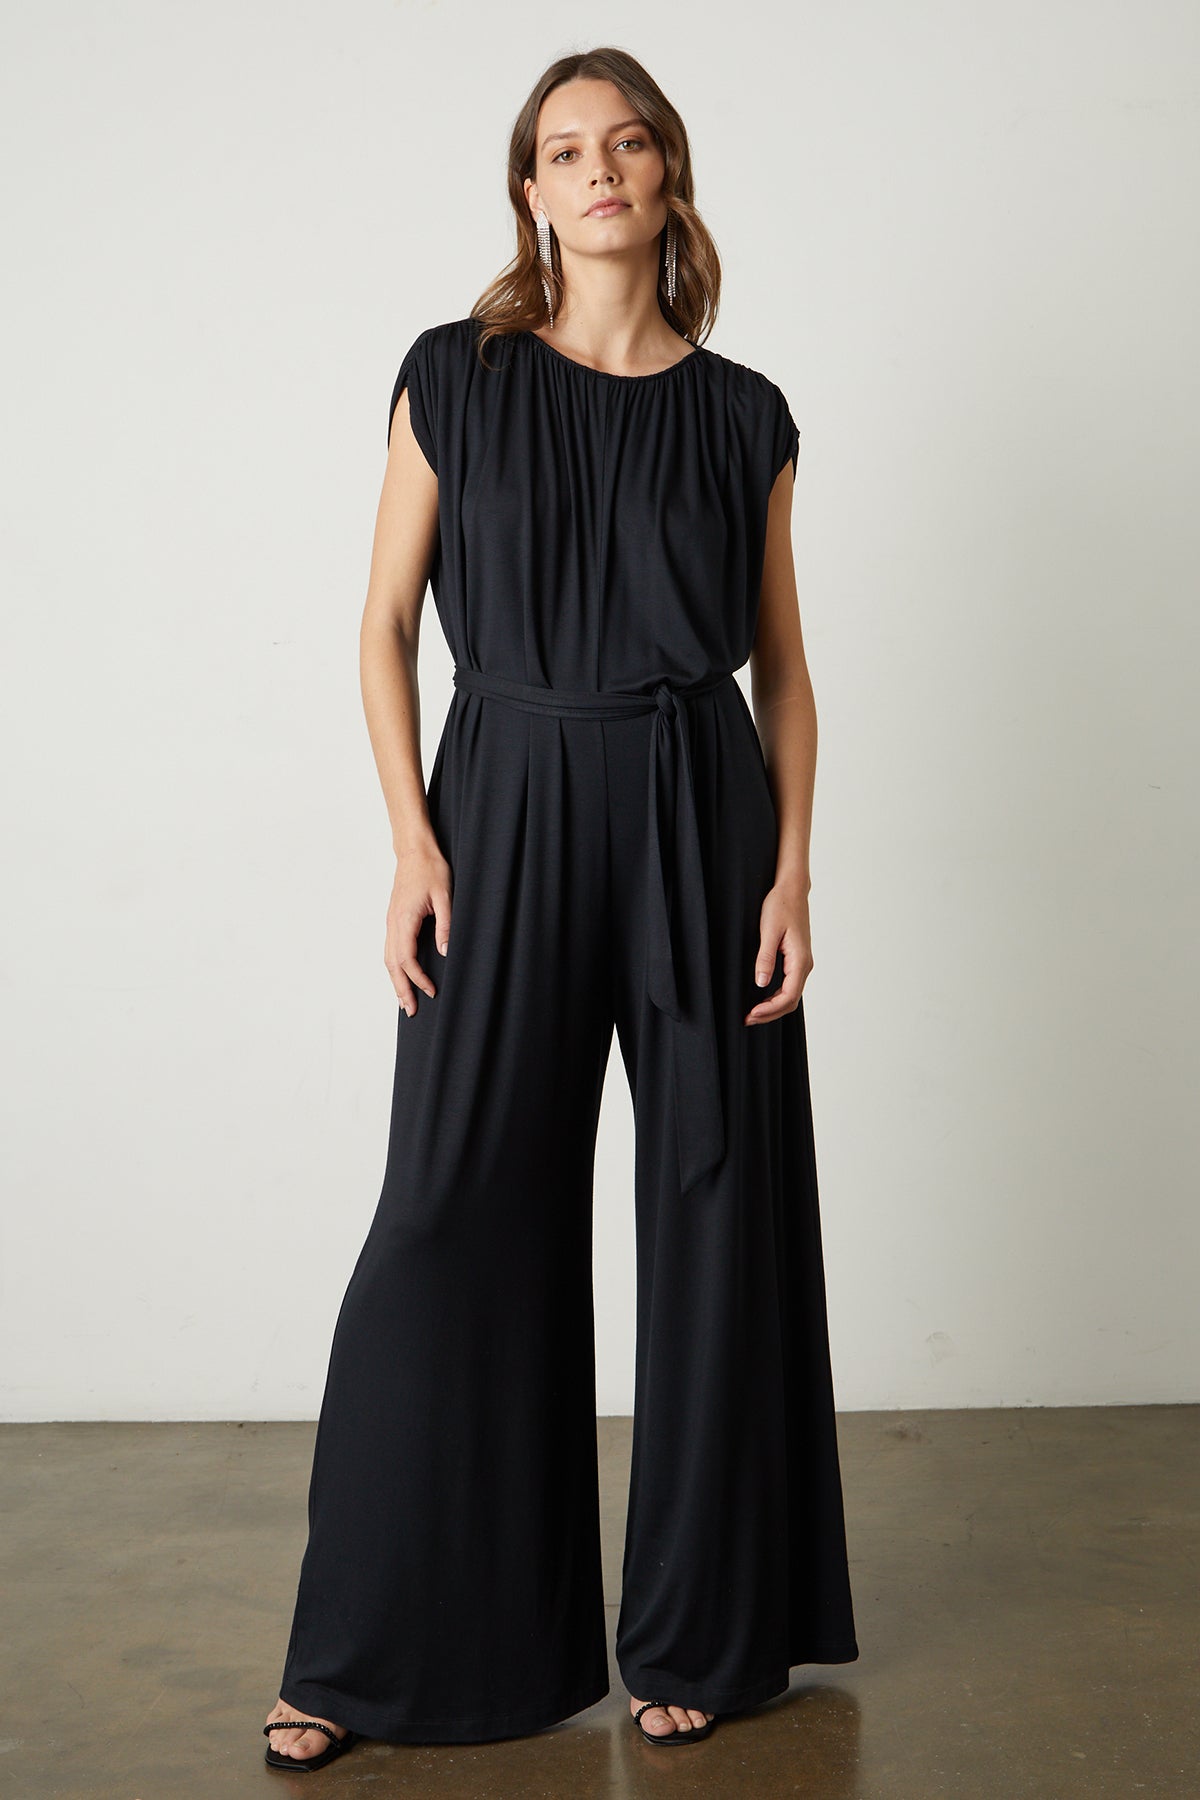 Norah Wide Leg Jumpsuit with tie in black full length front-25444271849665